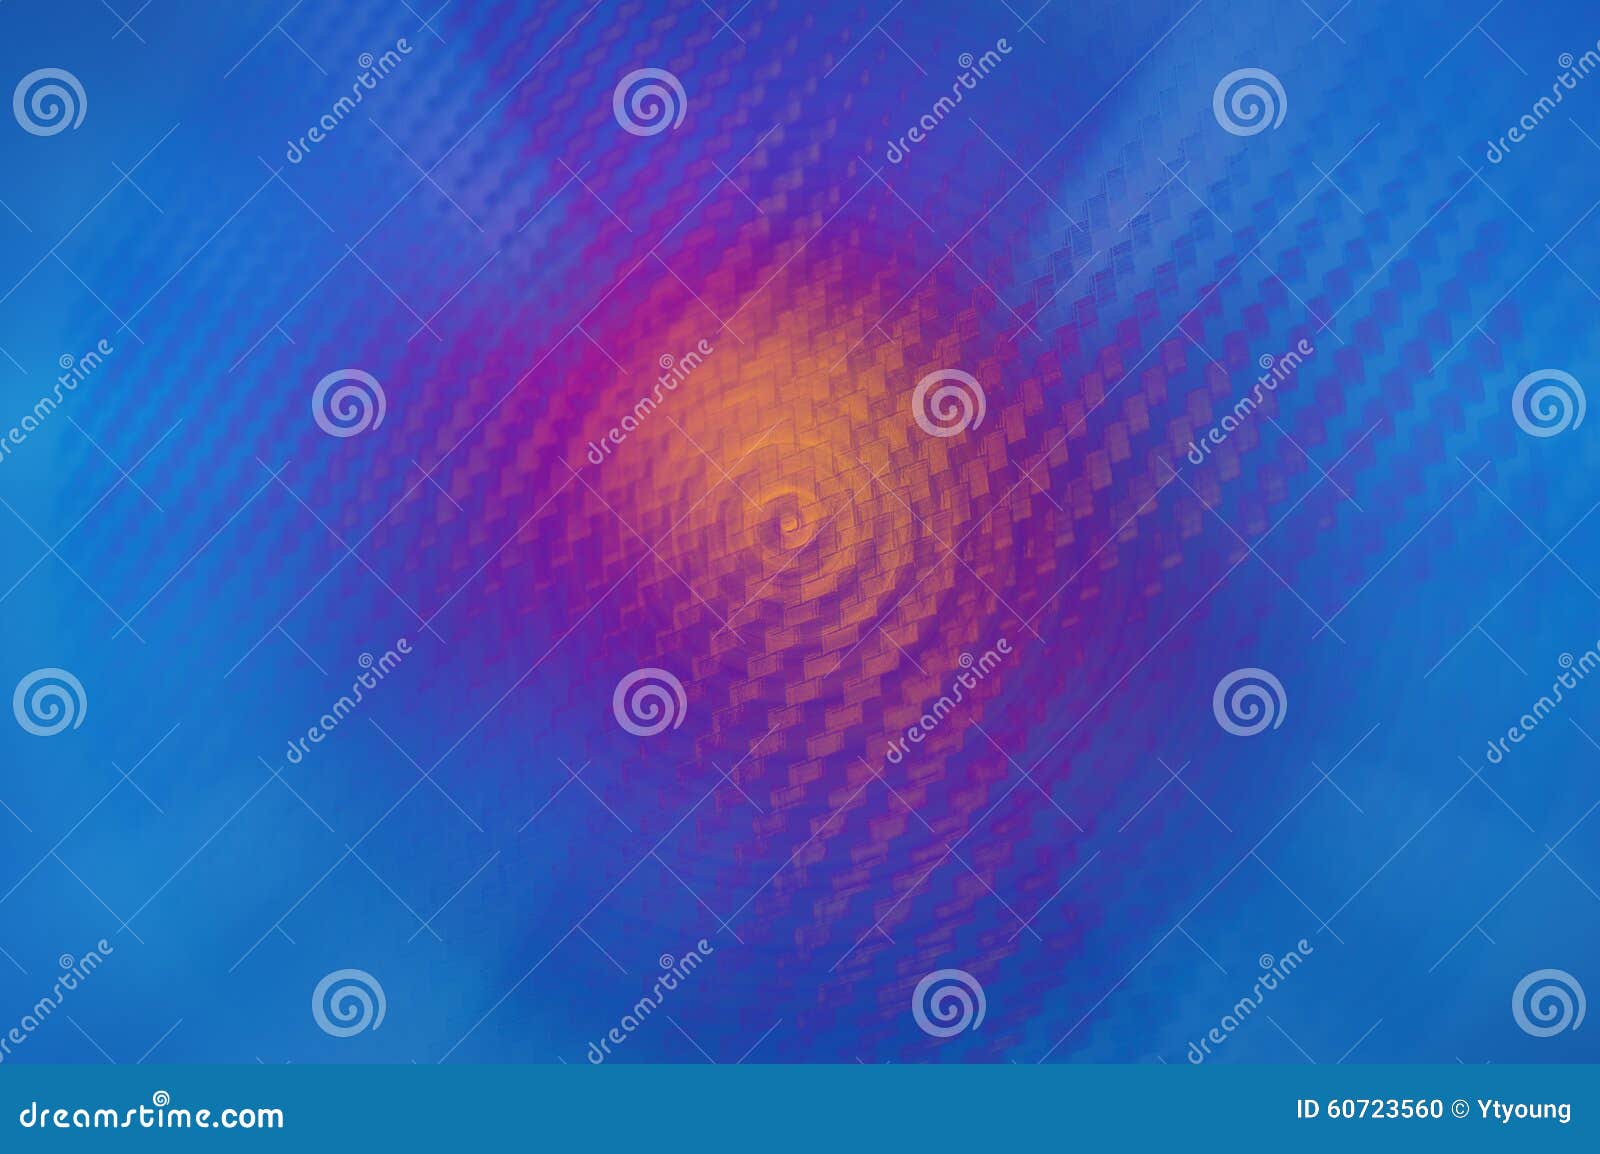 Purple, Red, Blue Abstract Colorful Background Stock Illustration